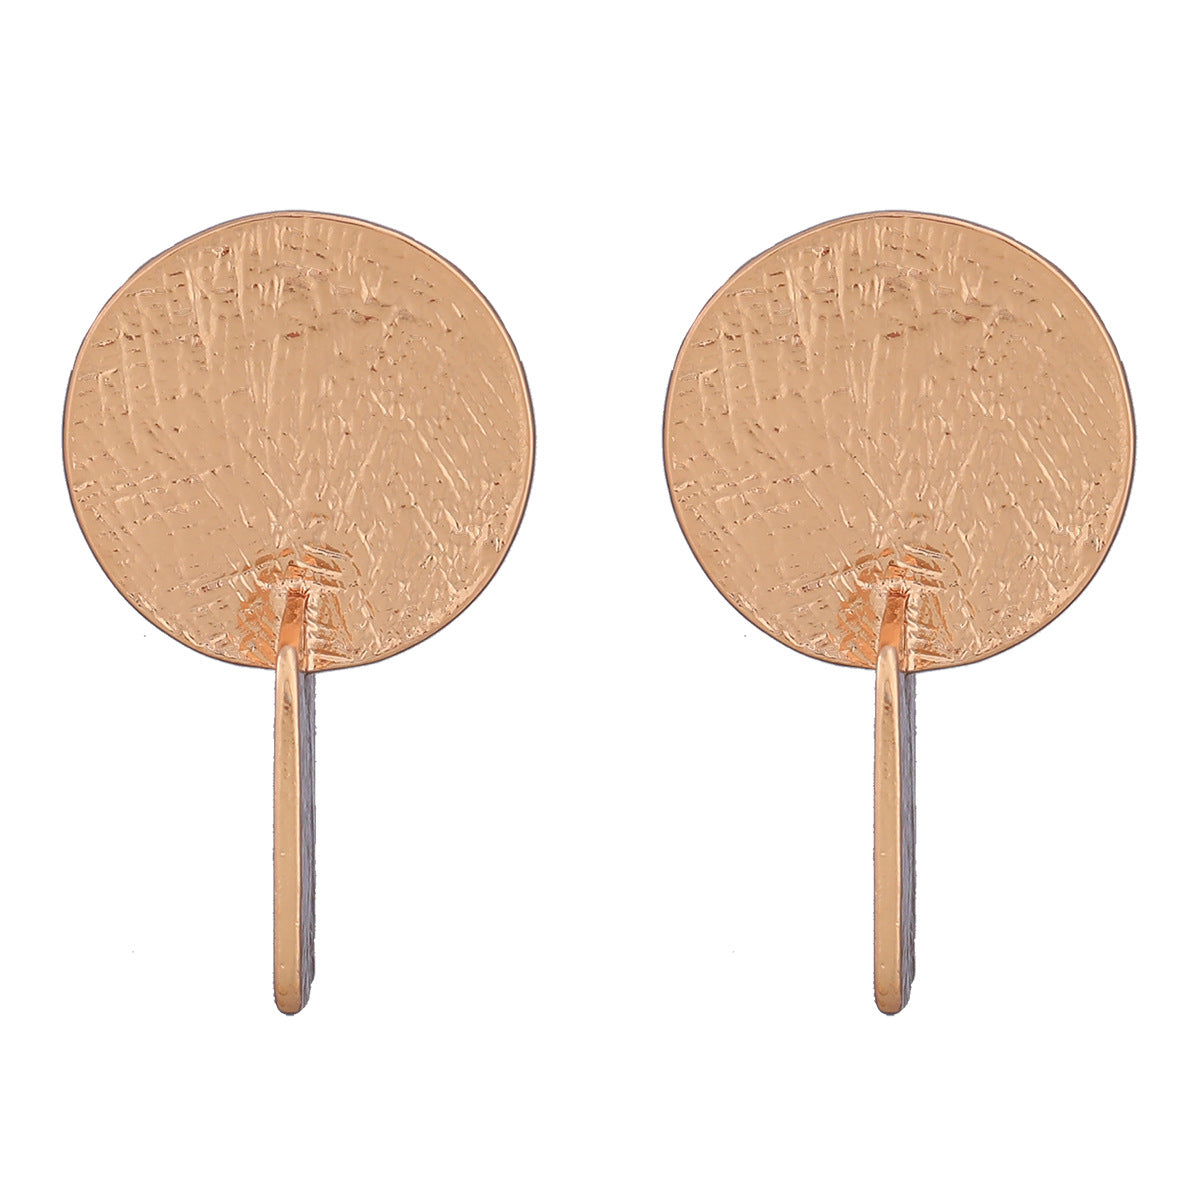 Round square exaggerated metallic earrings